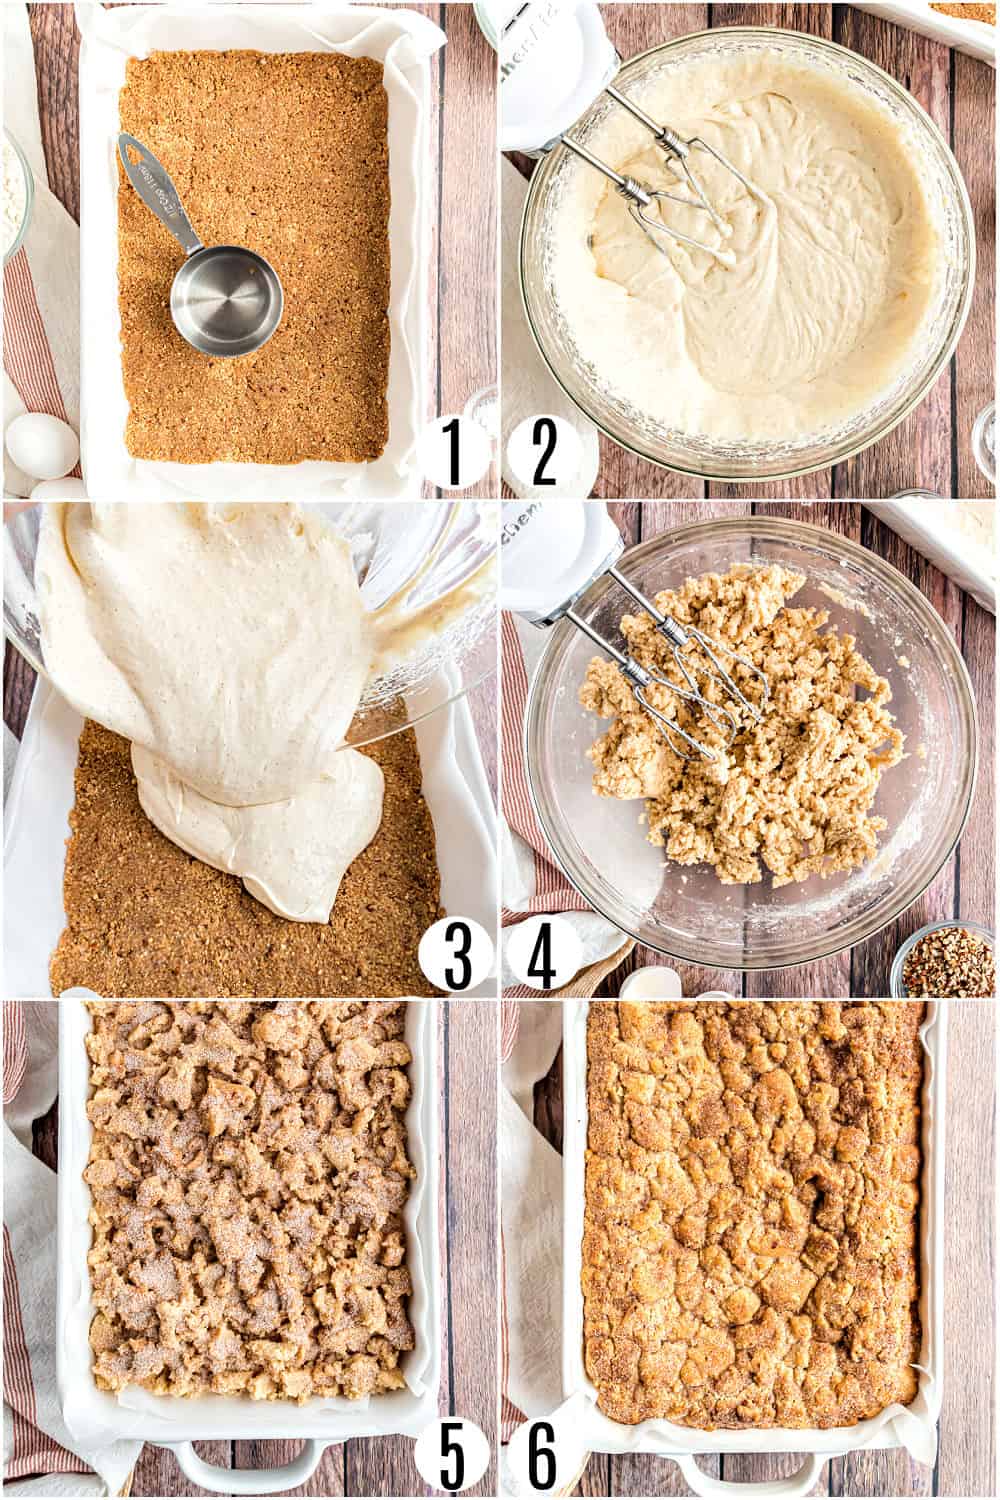 Step by step photos showing how to make snickerdoodle cheesecake bars.